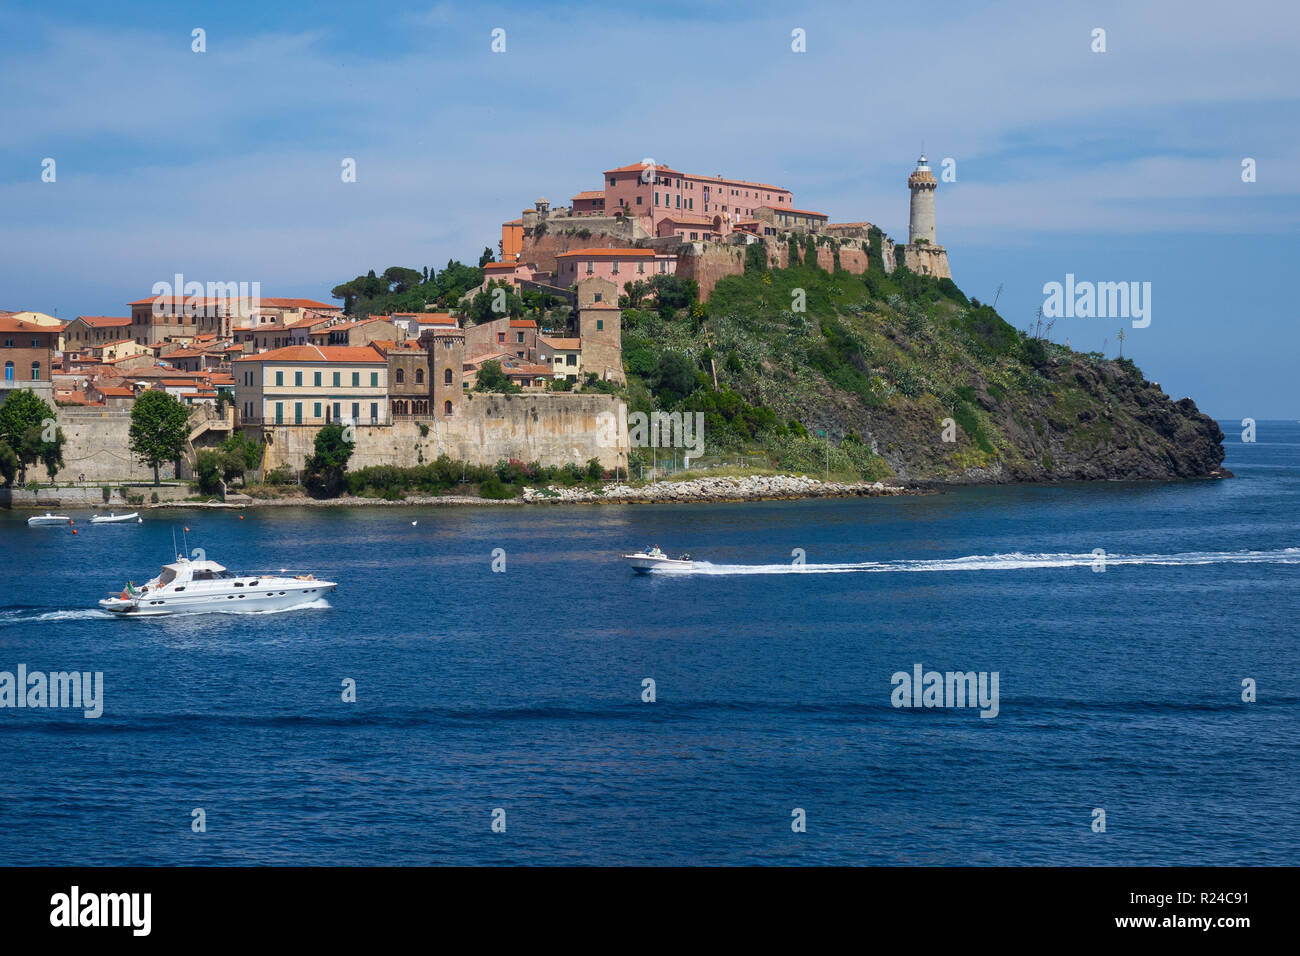 Tuscan Islands High Resolution Stock Photography and Images - Alamy